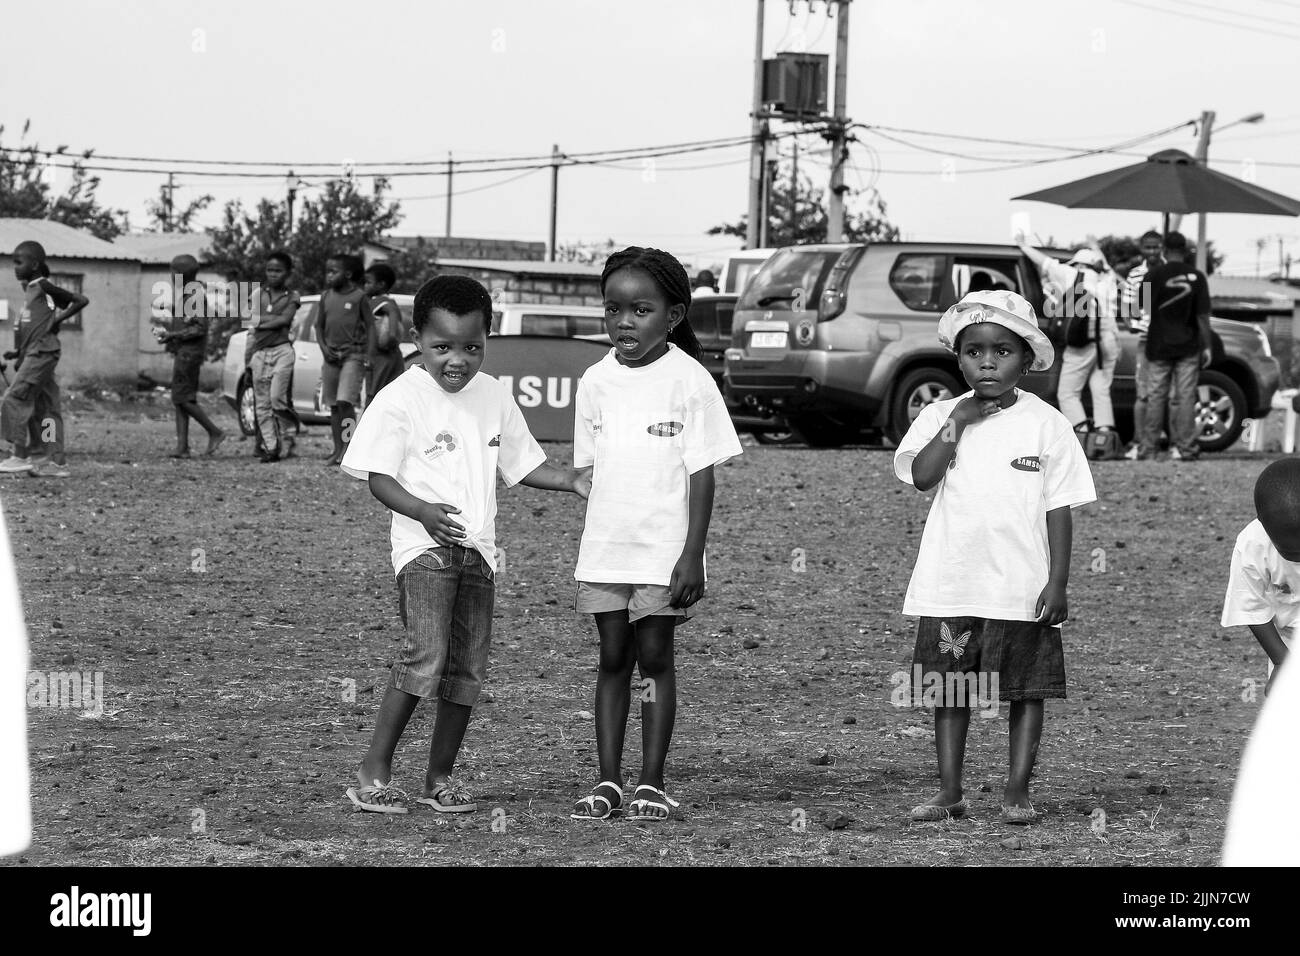 A grayscale of African children doing soccer related activities on the school playground in Johannesburg, South Africa Stock Photo